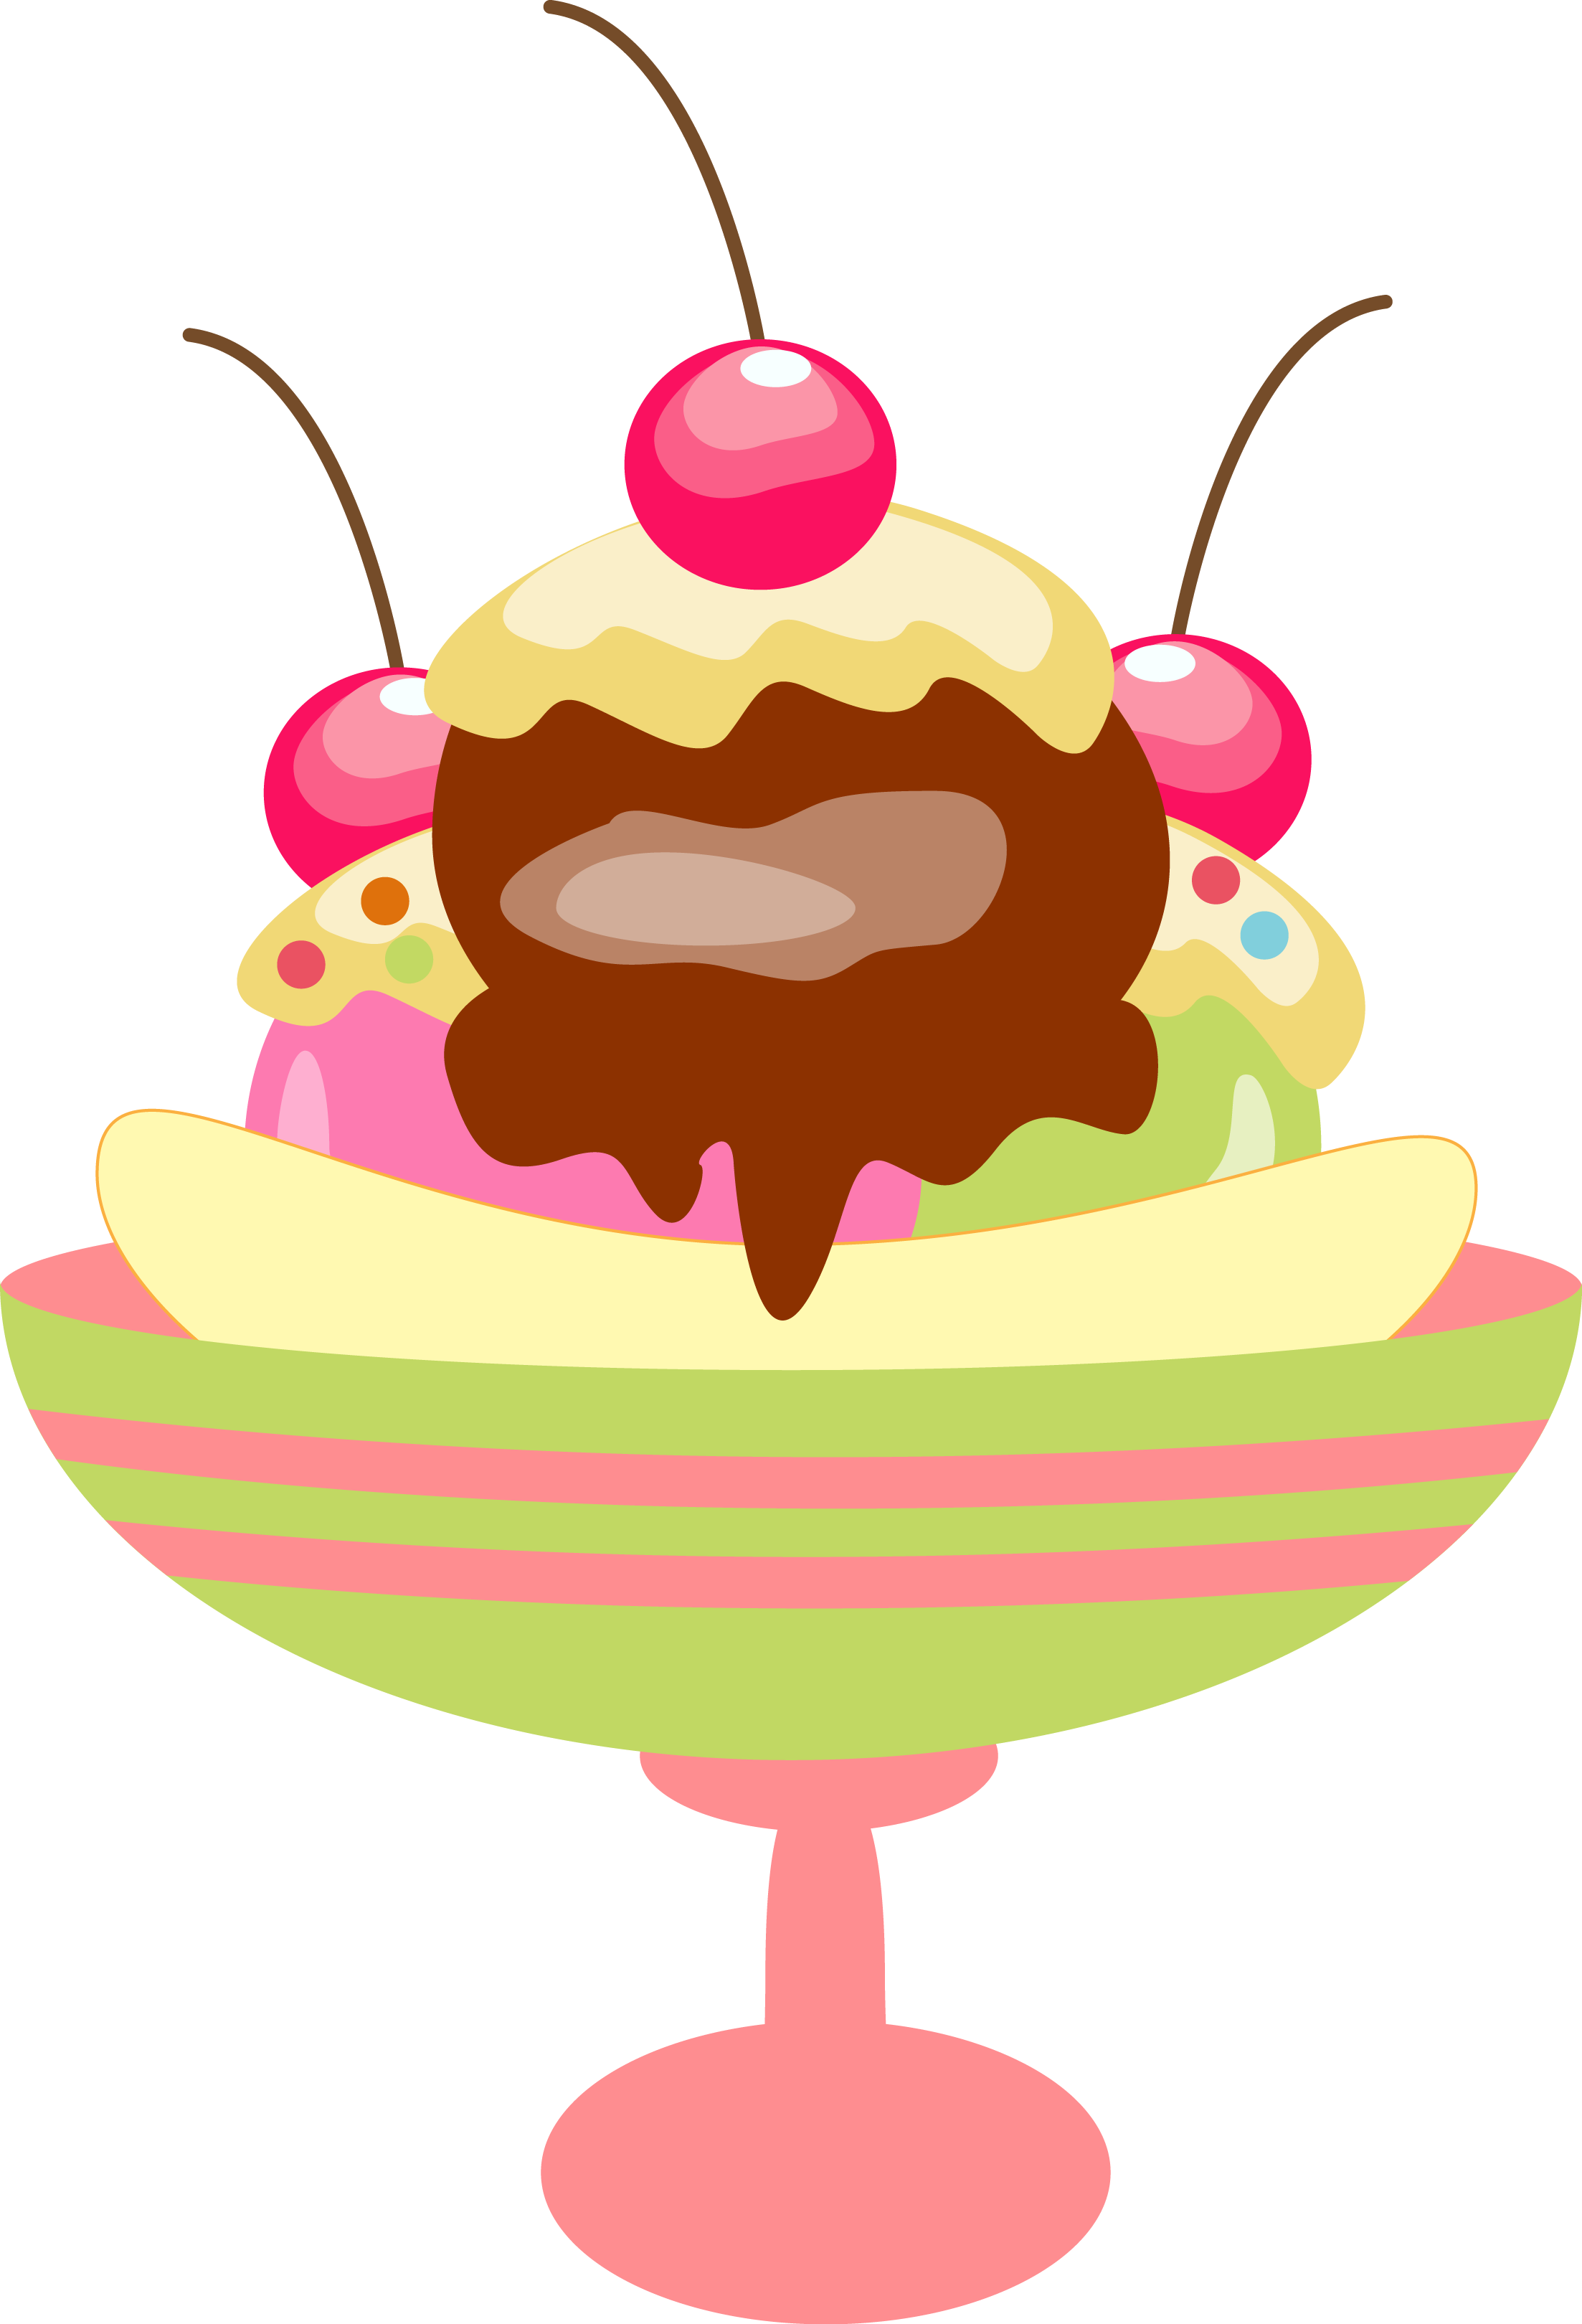 free-ice-cream-png-transparent-download-free-ice-cream-png-transparent